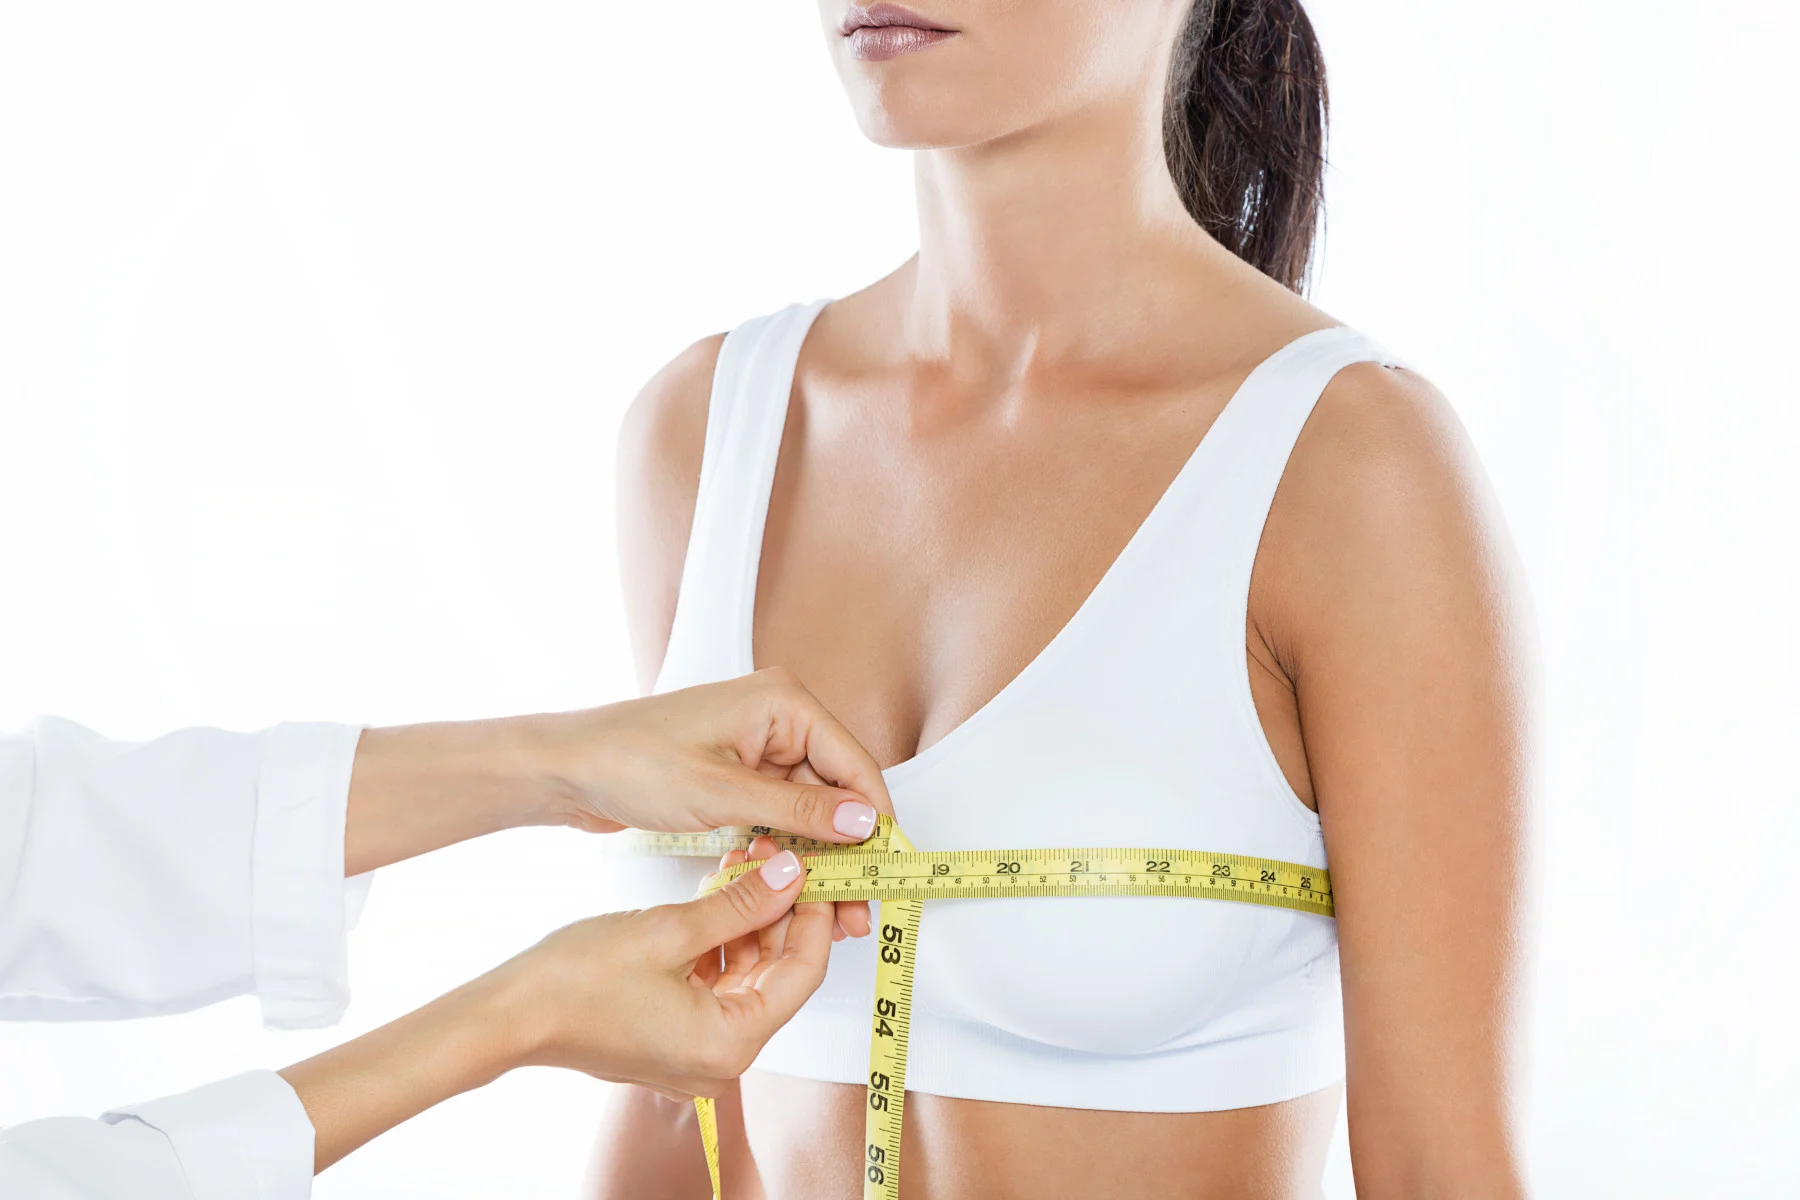 BannerImage_Breast Augmentation: Defining Treatments To Understand What Works For You